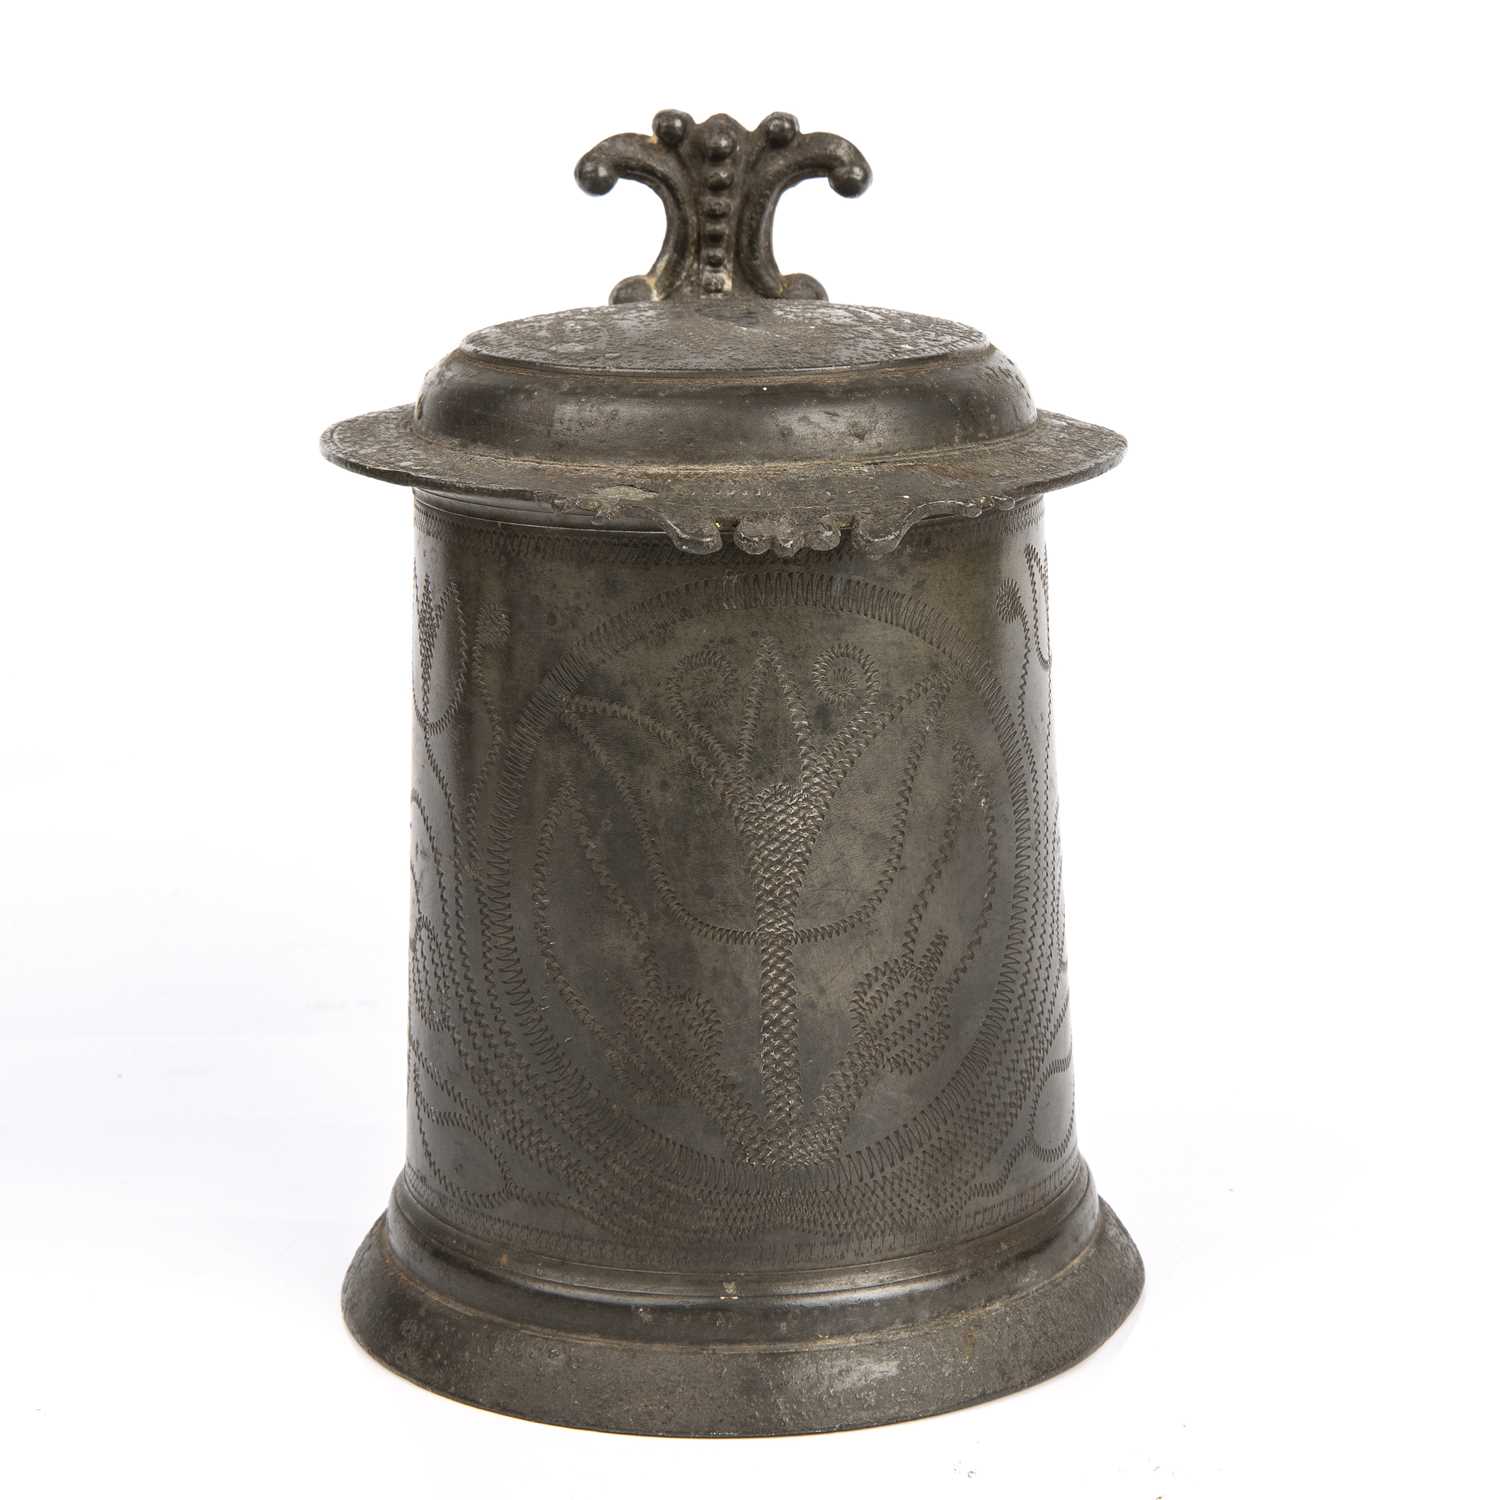 A 17th century wriggle work pewter flat lidded tankard by Lawrence Anderton of Wigan circa 1660-1690 - Image 2 of 6